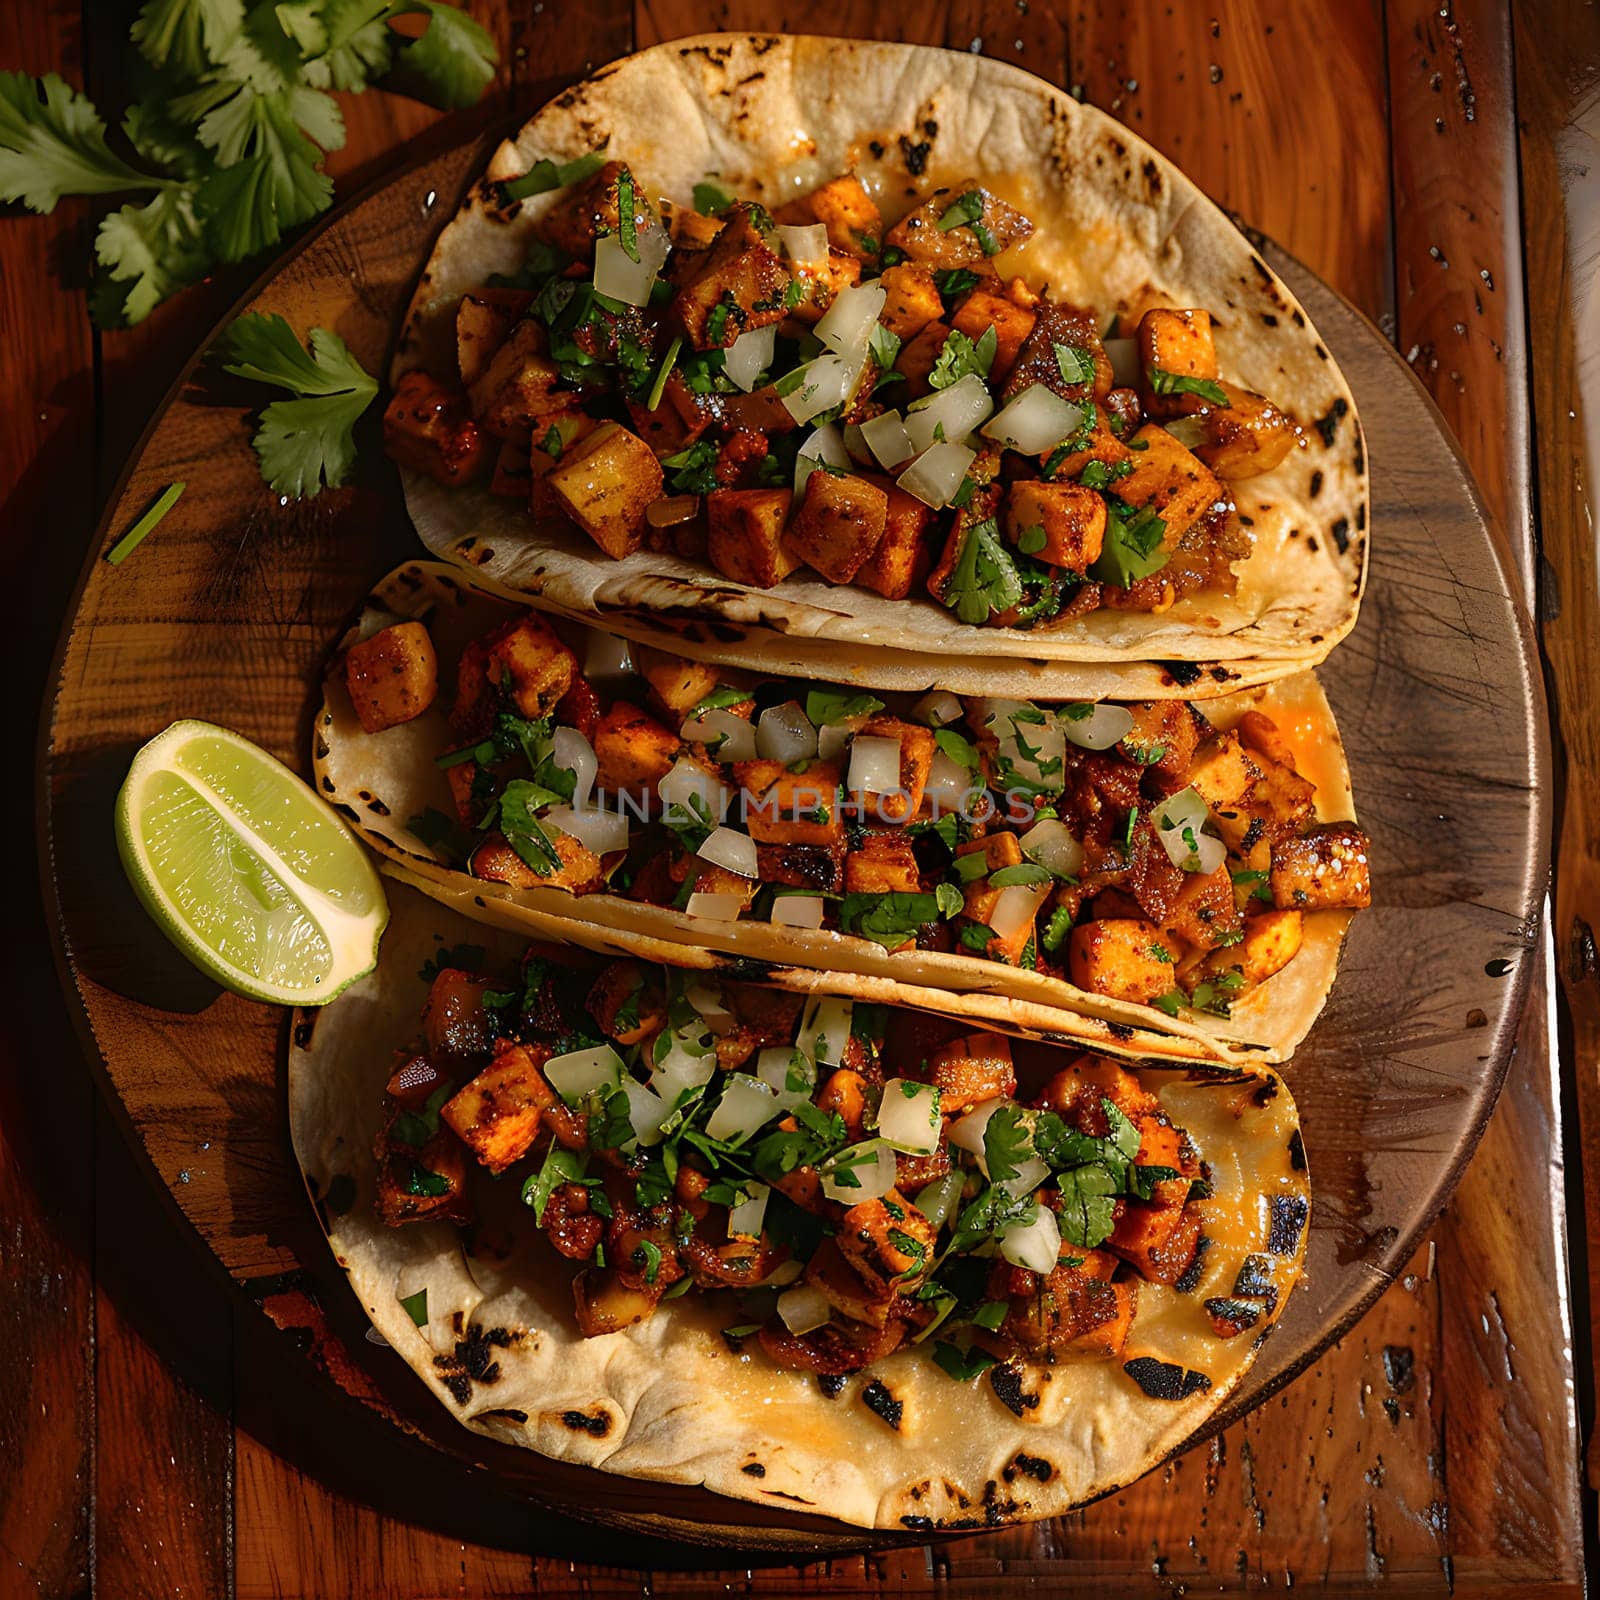 Three tacos are artfully arranged in a stack on a rustic wooden cutting board. The dish features a delicious blend of ingredients including fines herbes, Persian lime, and fresh produce